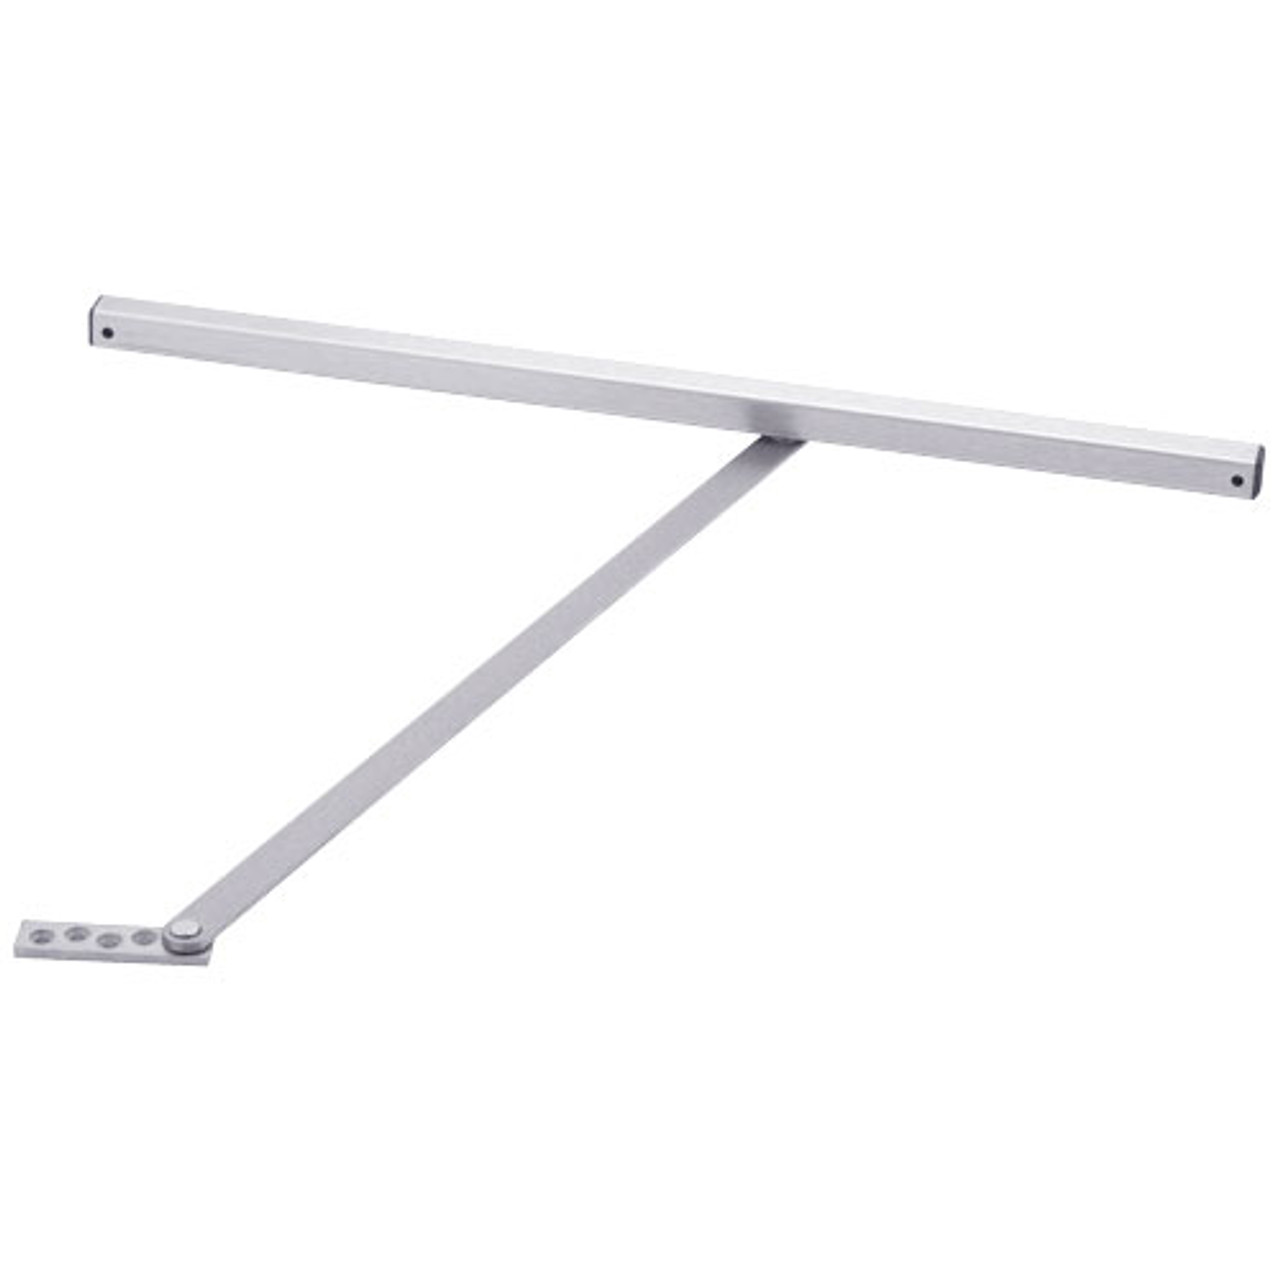 452S-US32 Glynn Johnson 450 Series Medium Duty Surface Overhead in Polished stainless steel